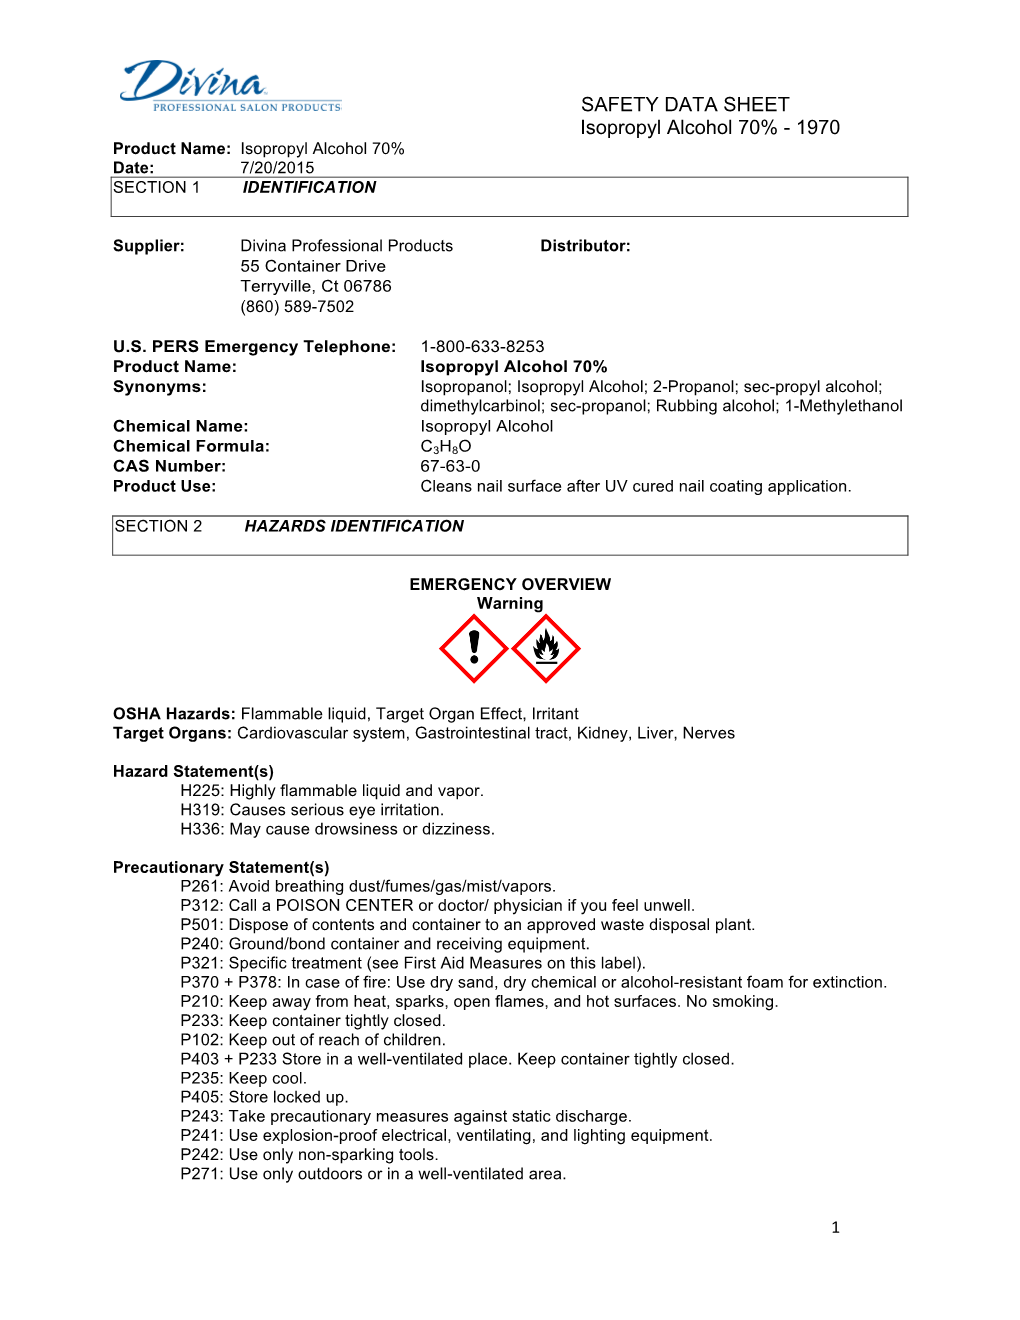 SAFETY DATA SHEET Isopropyl Alcohol 70% - 1970 Product Name: Isopropyl Alcohol 70% Date: 7/20/2015 SECTION 1 IDENTIFICATION